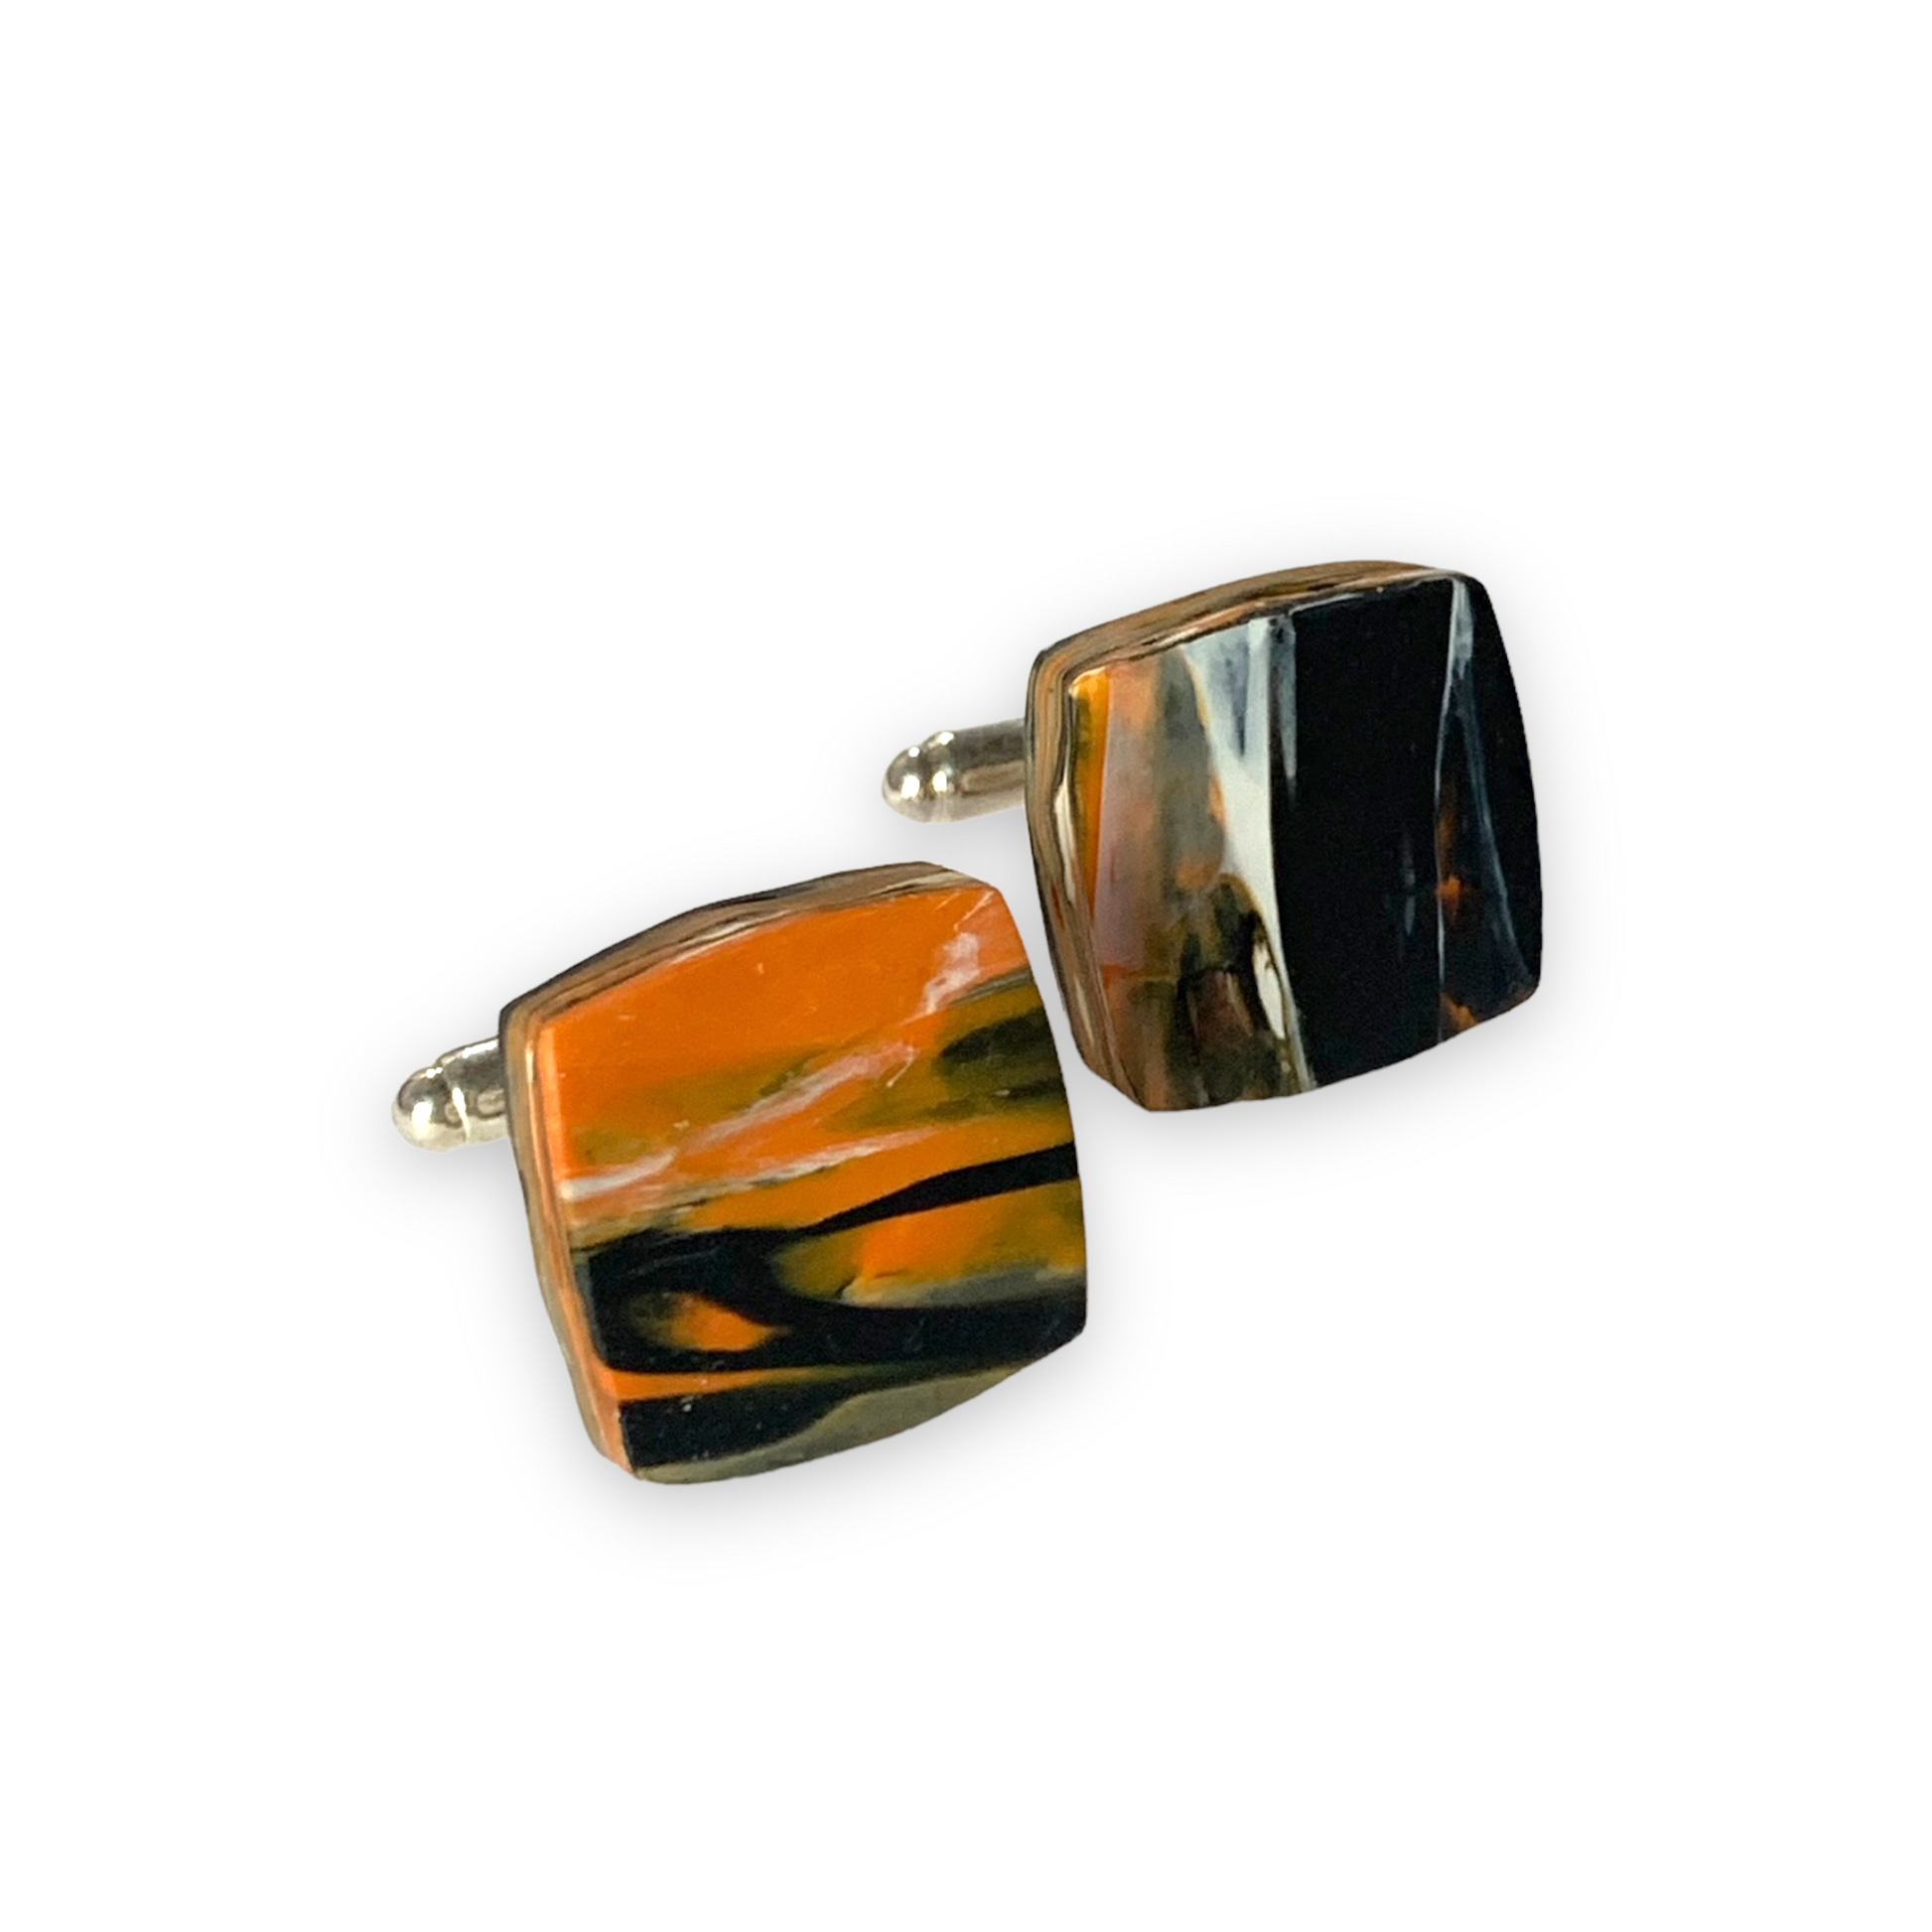 Unique Handmade Recycled Plastic Square Orange Cufflinks with brass findings 